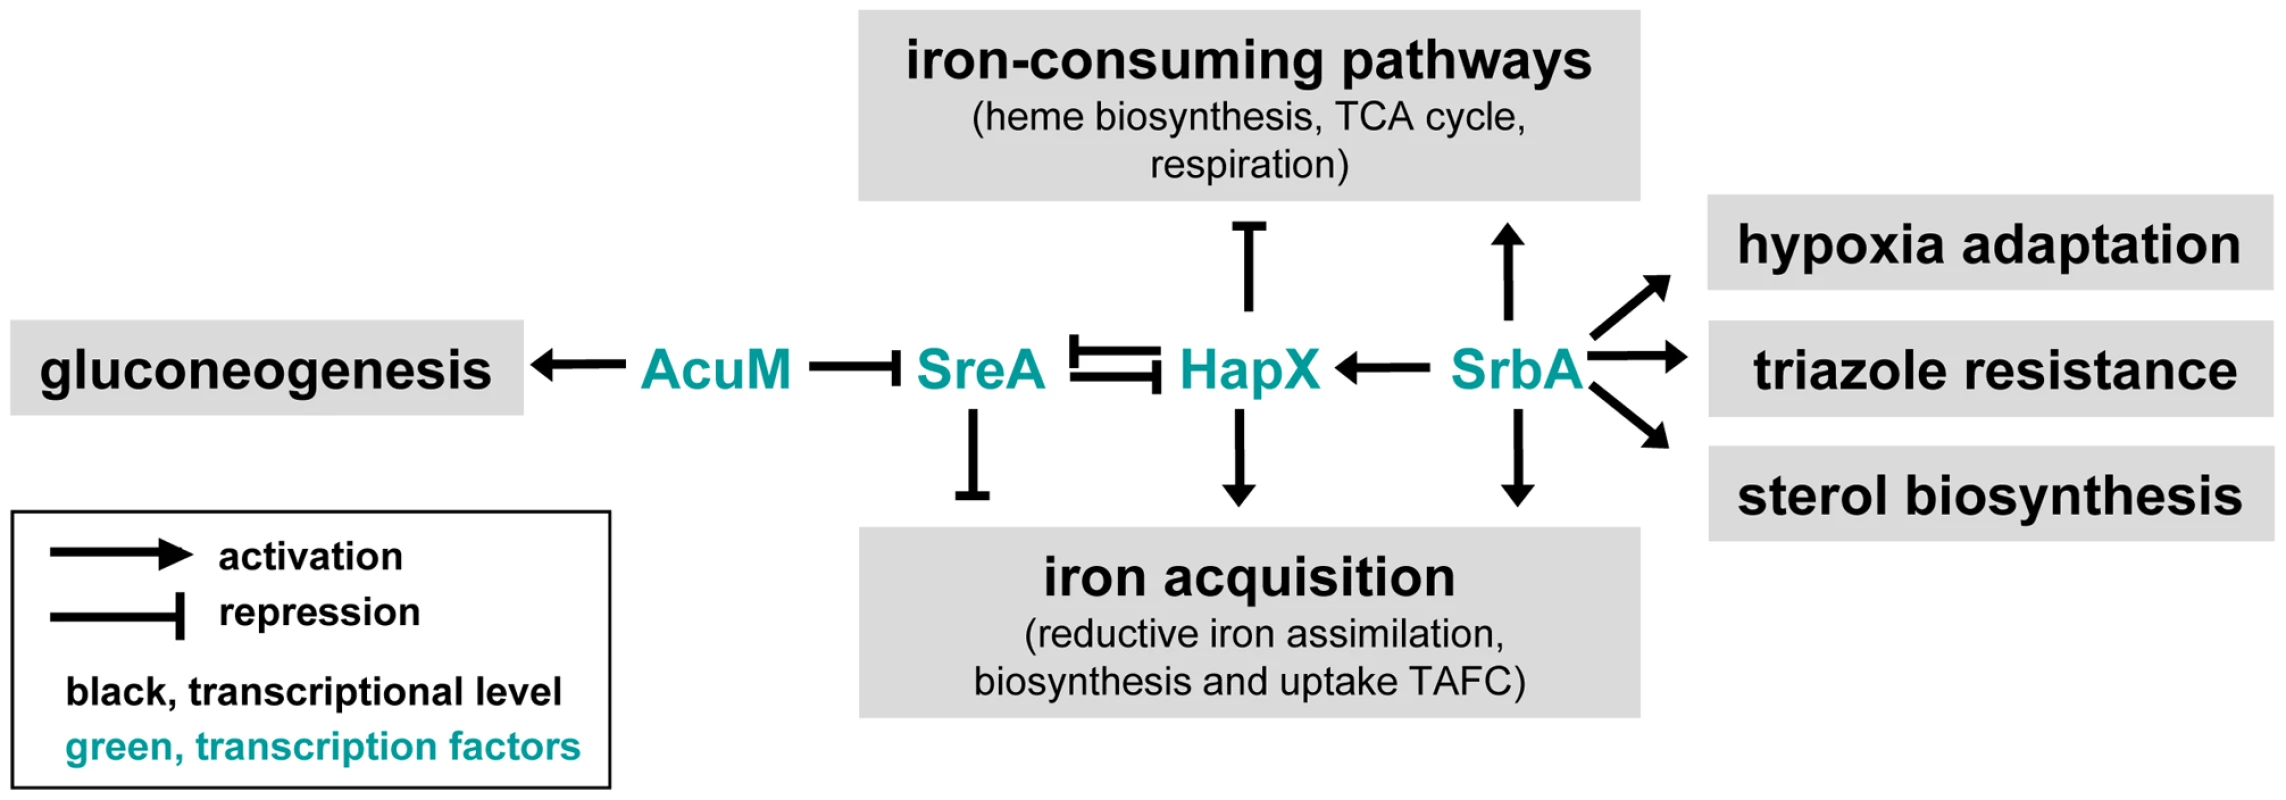 Model for relationships between the transcriptional regulators SrbA, SreA, HapX, and AcuM and their roles in iron acquisition and ergosterol biosynthesis.